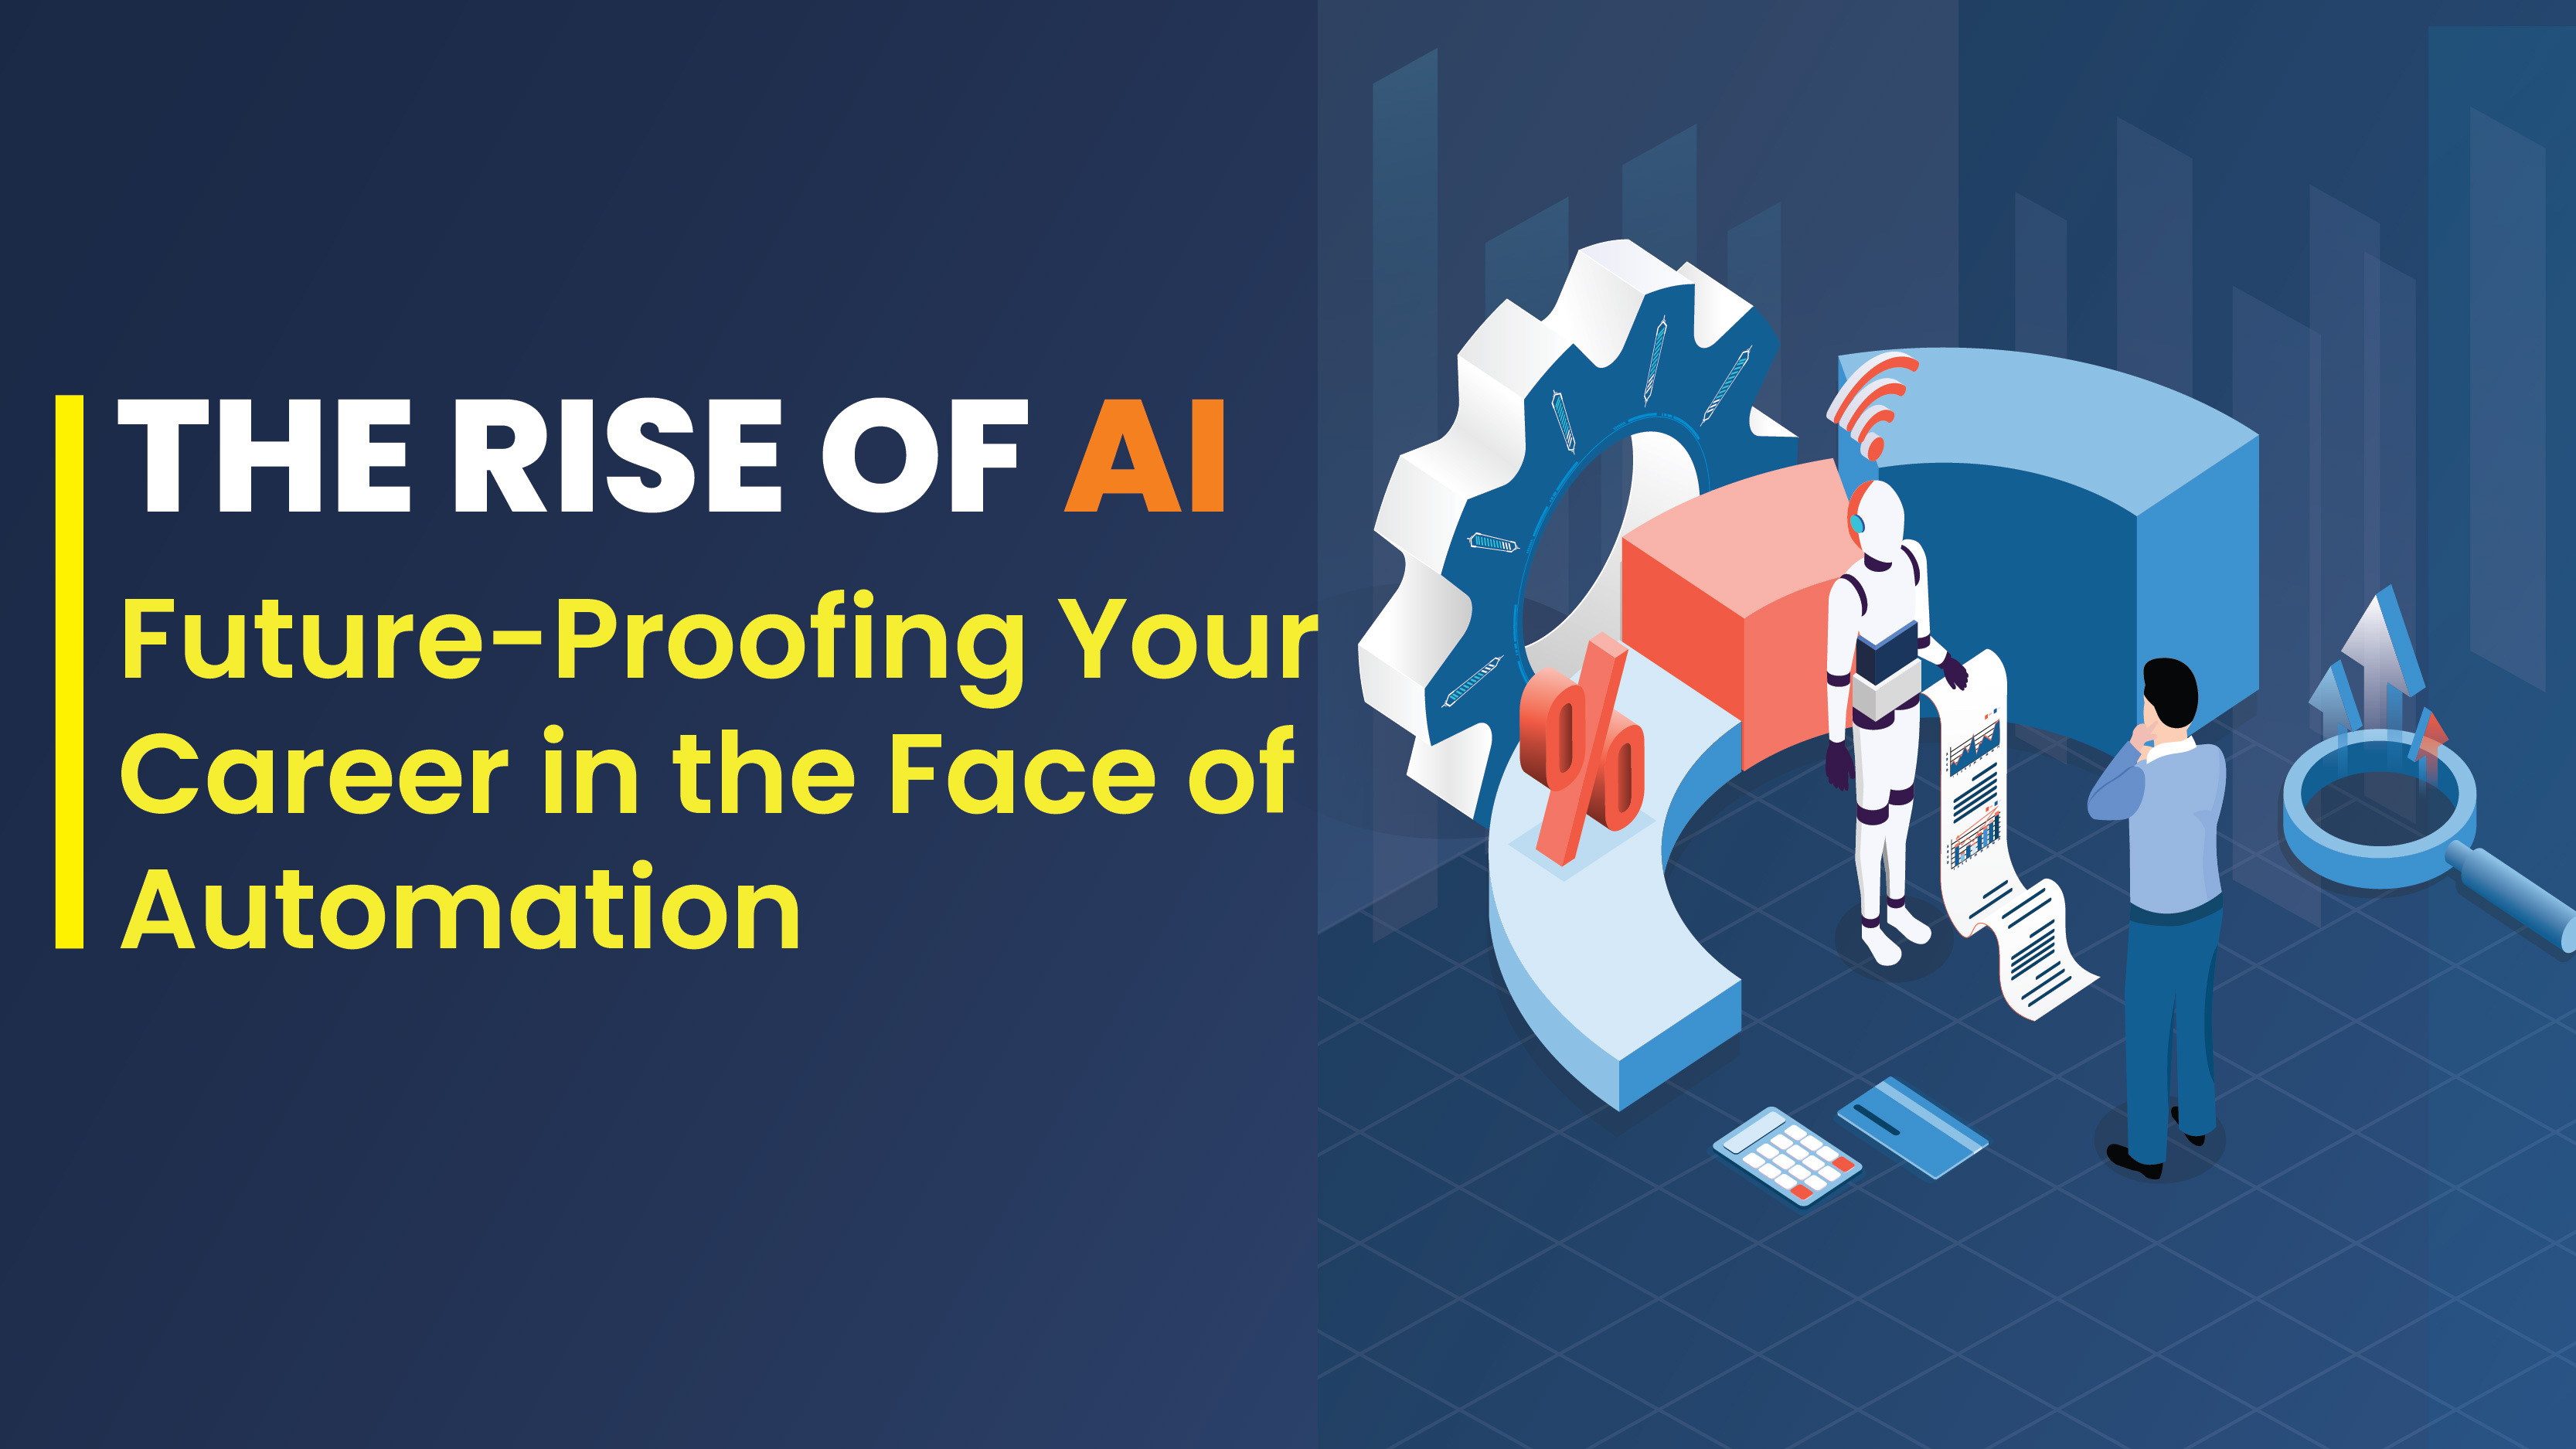 The Rise of AI: Future-Proofing Your Career in the Face of Automation